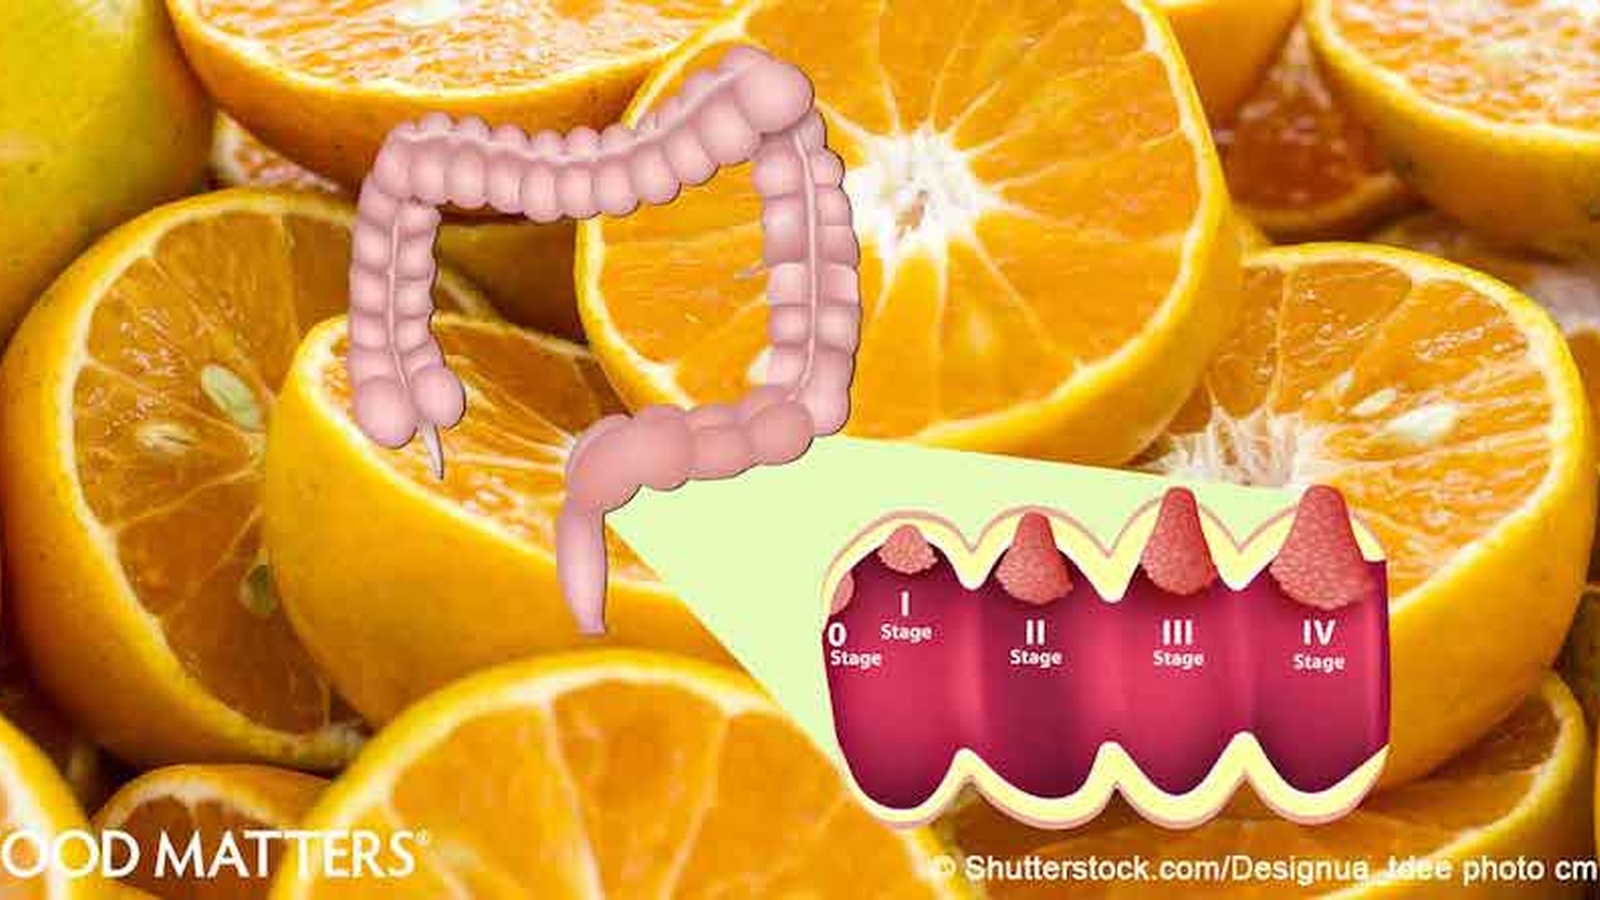 Vitamin C Can Kill Colorectal Cancer Cells!